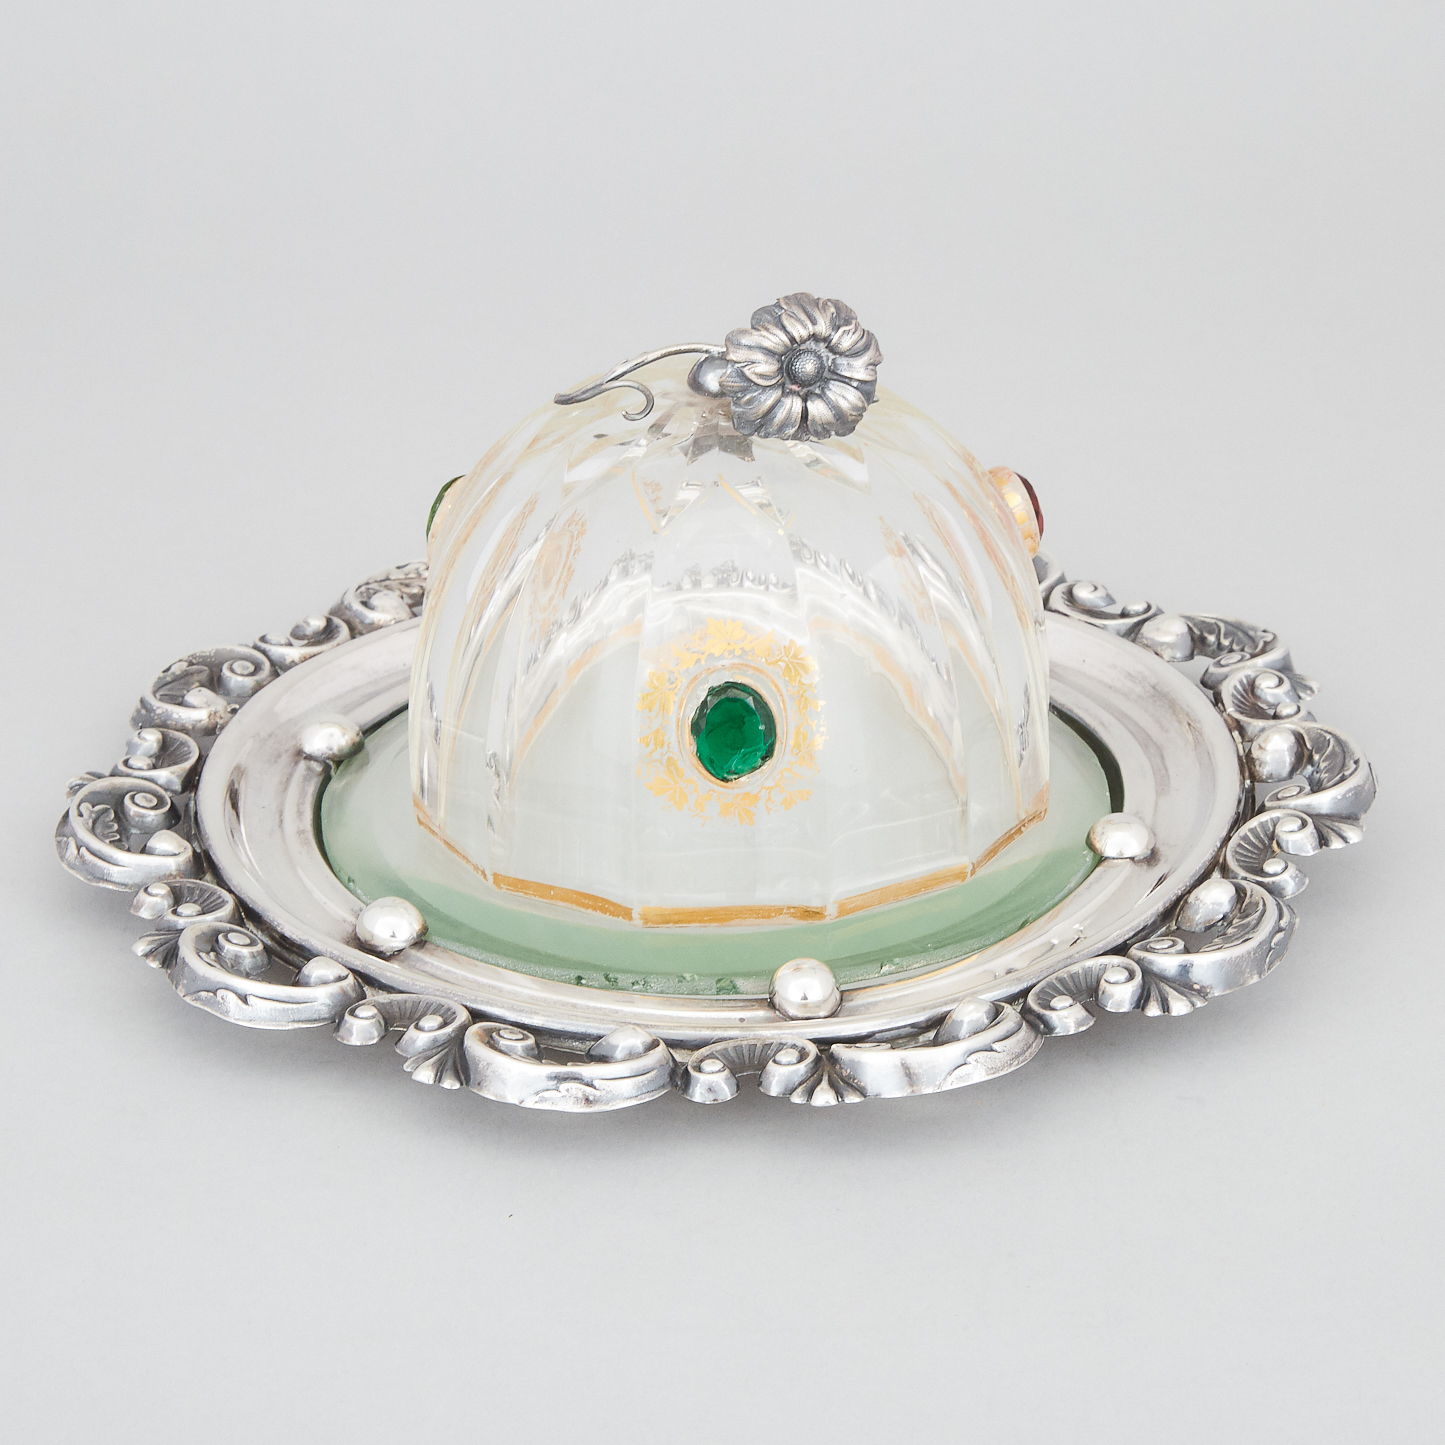 Austro-Hungarian Silver and Cut Glass Cheese Dish and a Cover, Vienna, 1862